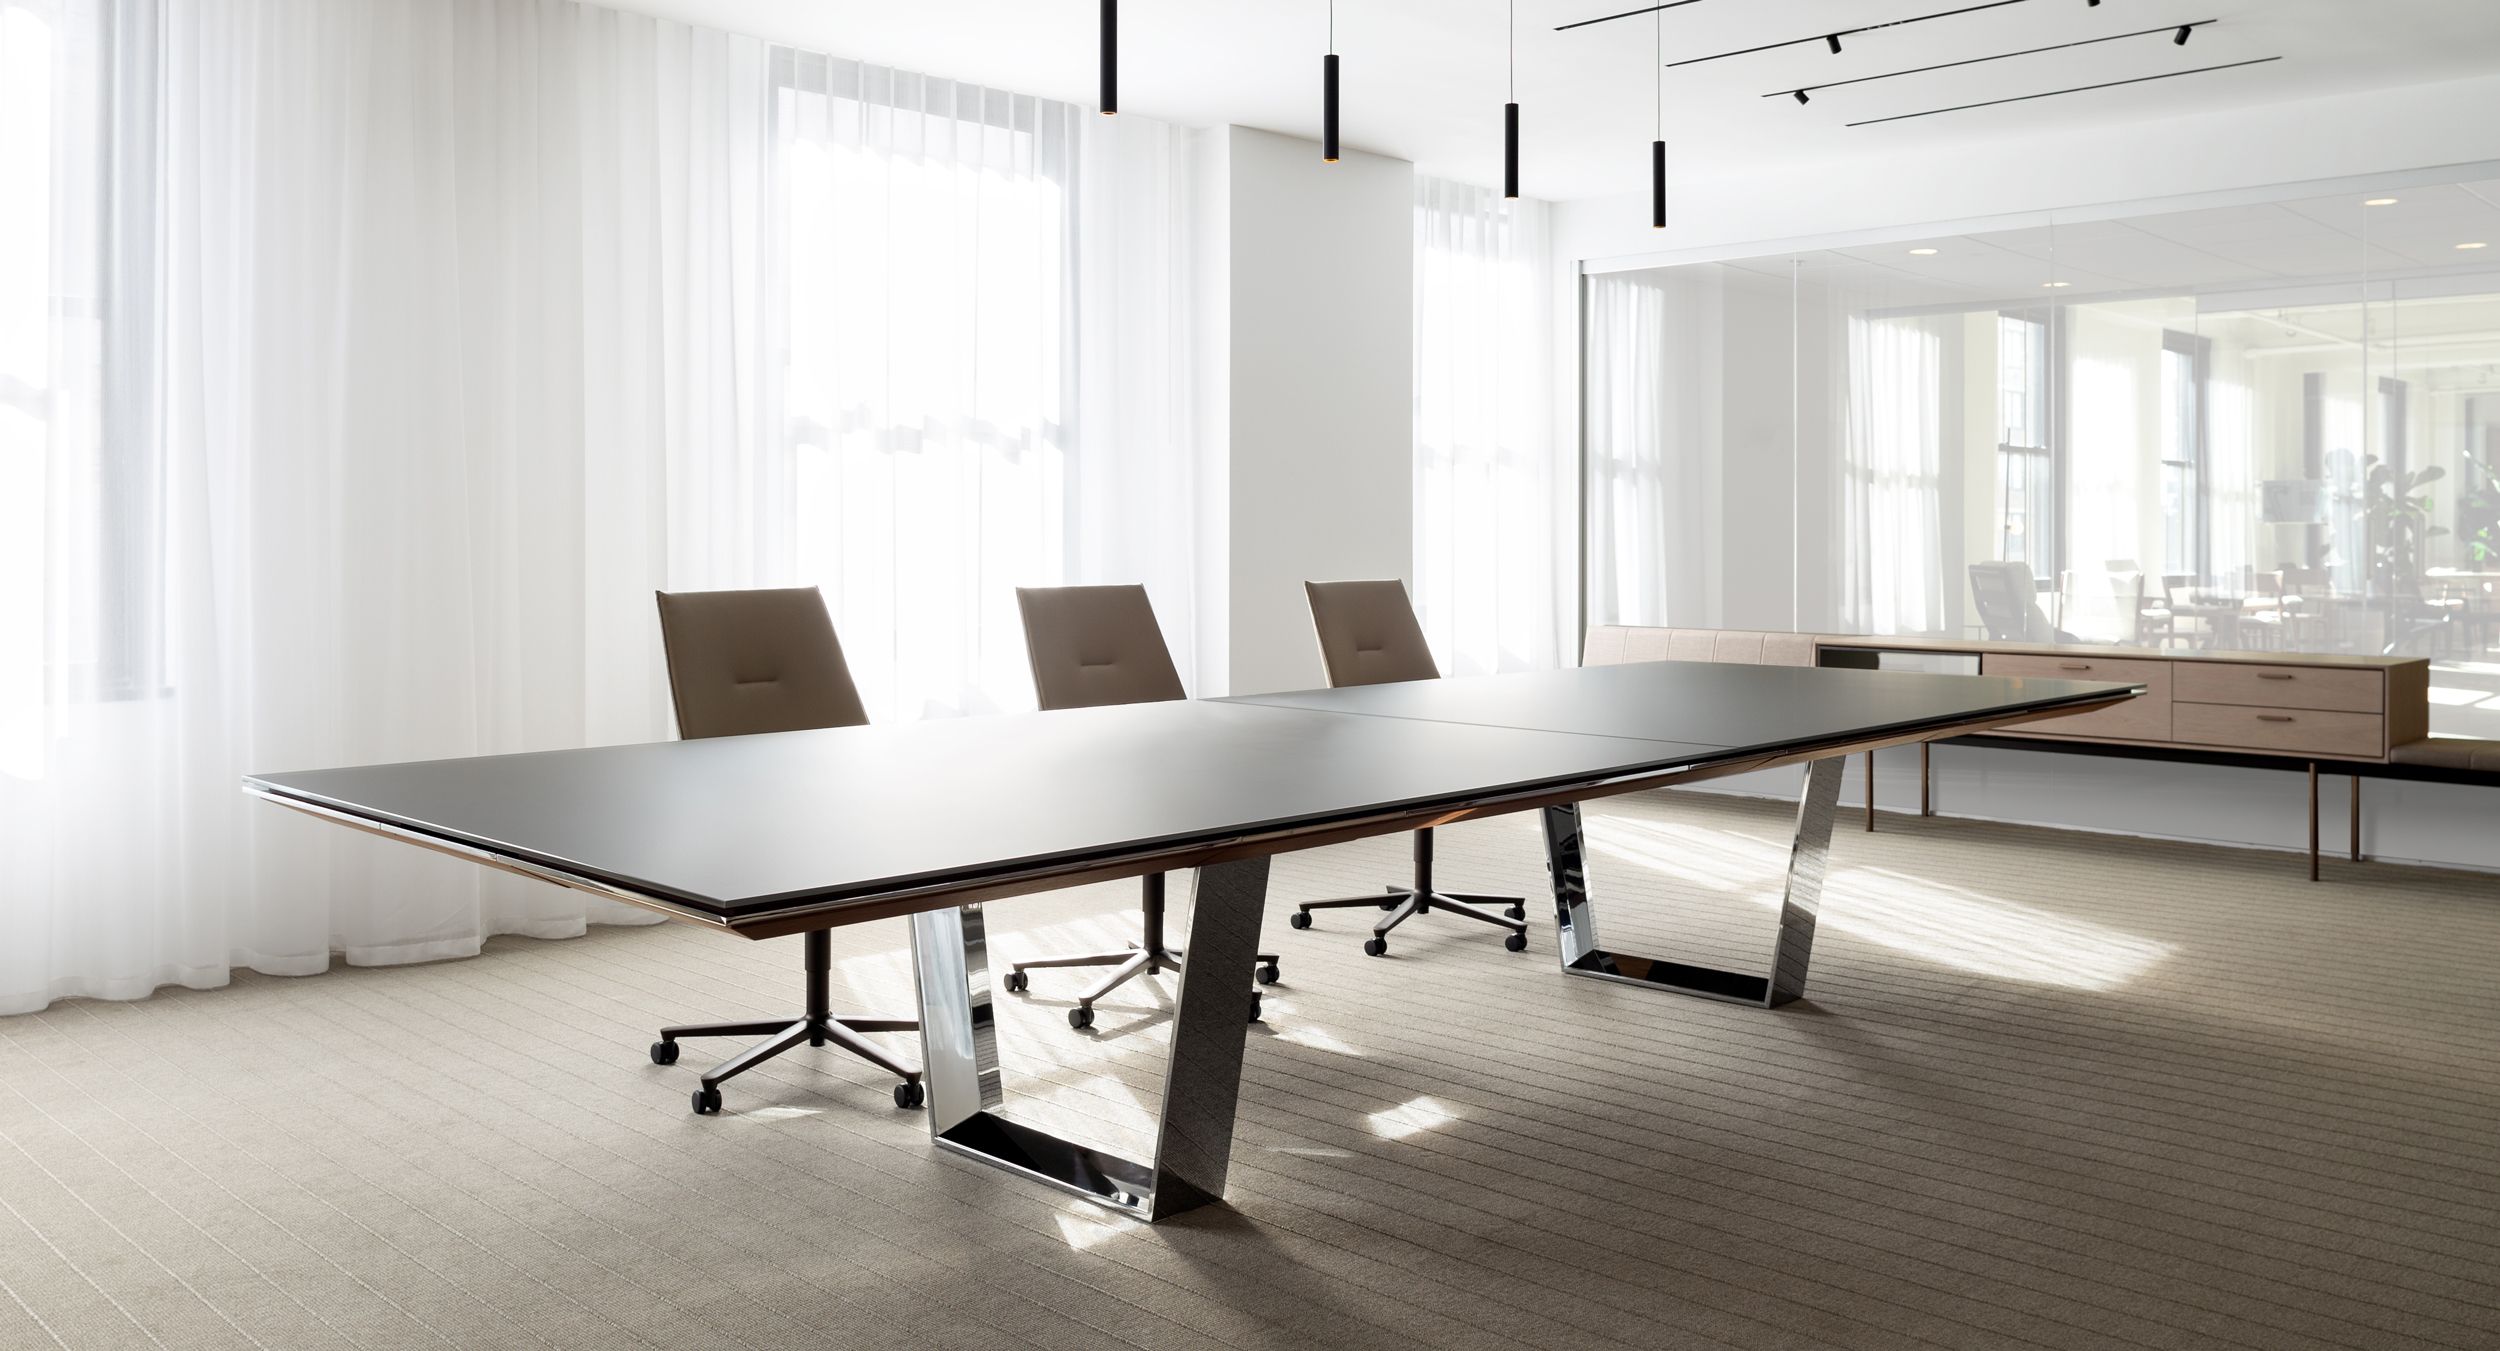 A Mesa conference table with etched back-painted glass and polished chrome is the centerpiece of the airy conference room.